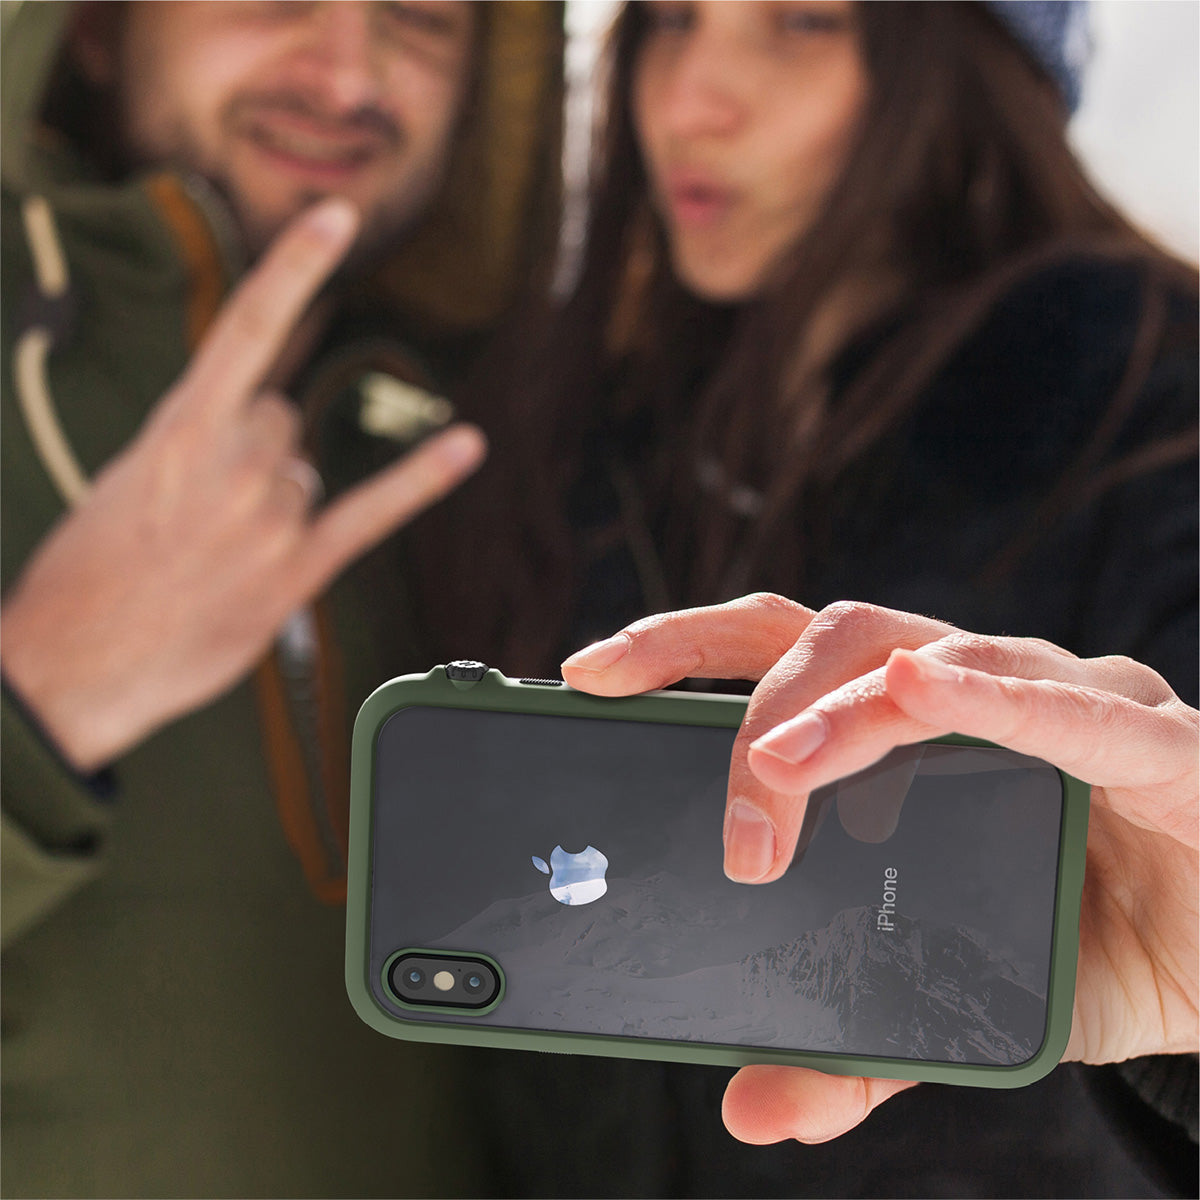 Catalyst Impact Protection Case for iPhone X/XR/Xs/Xs Max showing people using the phone with the catalyst case for selfie outdoor text reads iphone sold separately color shown may differ on the product screen protector not included